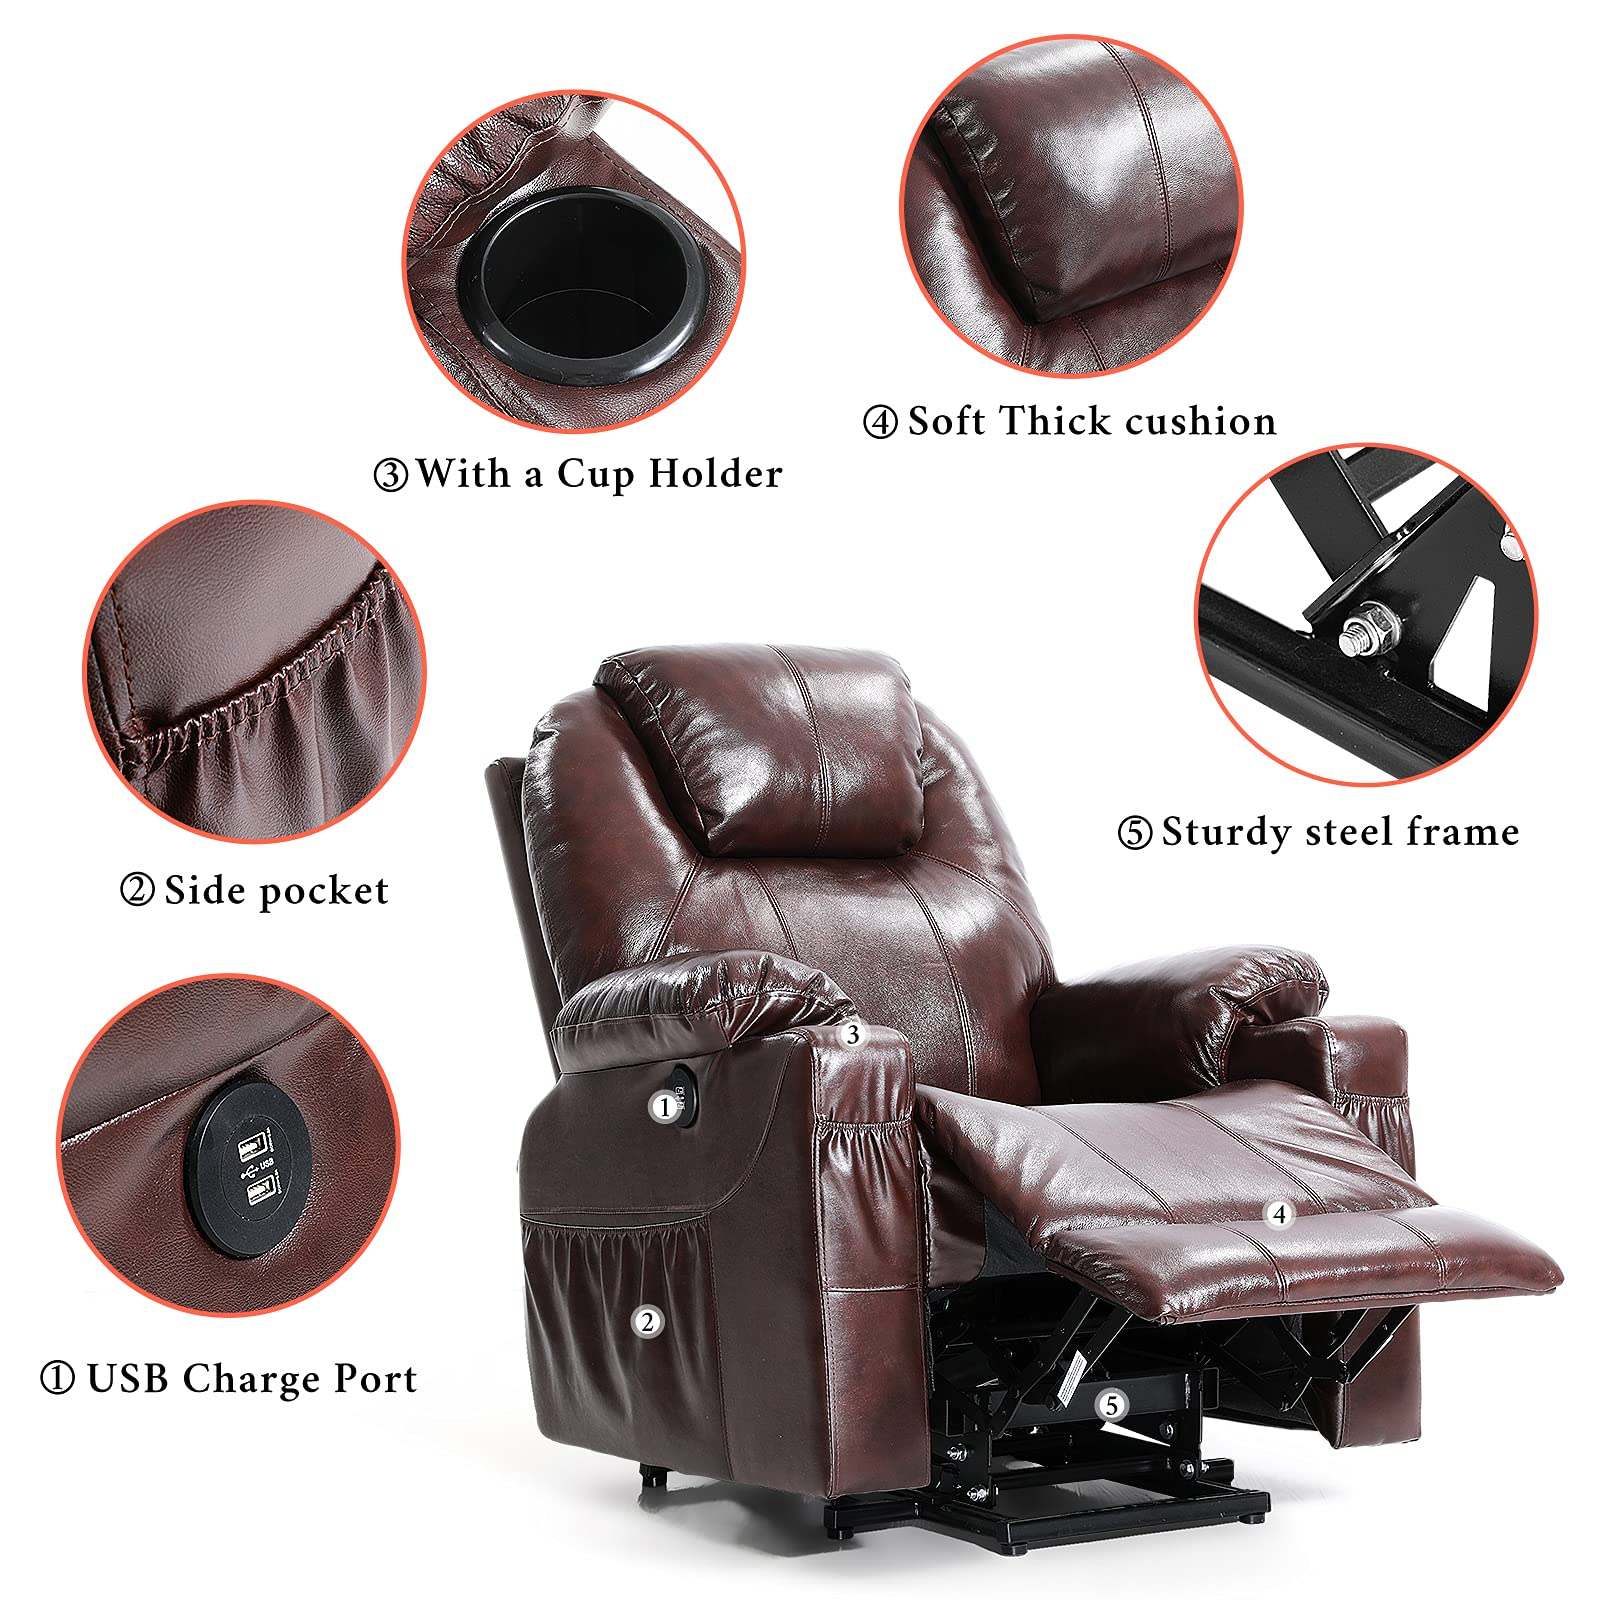 Power Lift Recliner Chair for Elderly,Massage Chair Recliner with Massage and Heating Function,160 ° Tilt Ergonomic with Footrest, Black